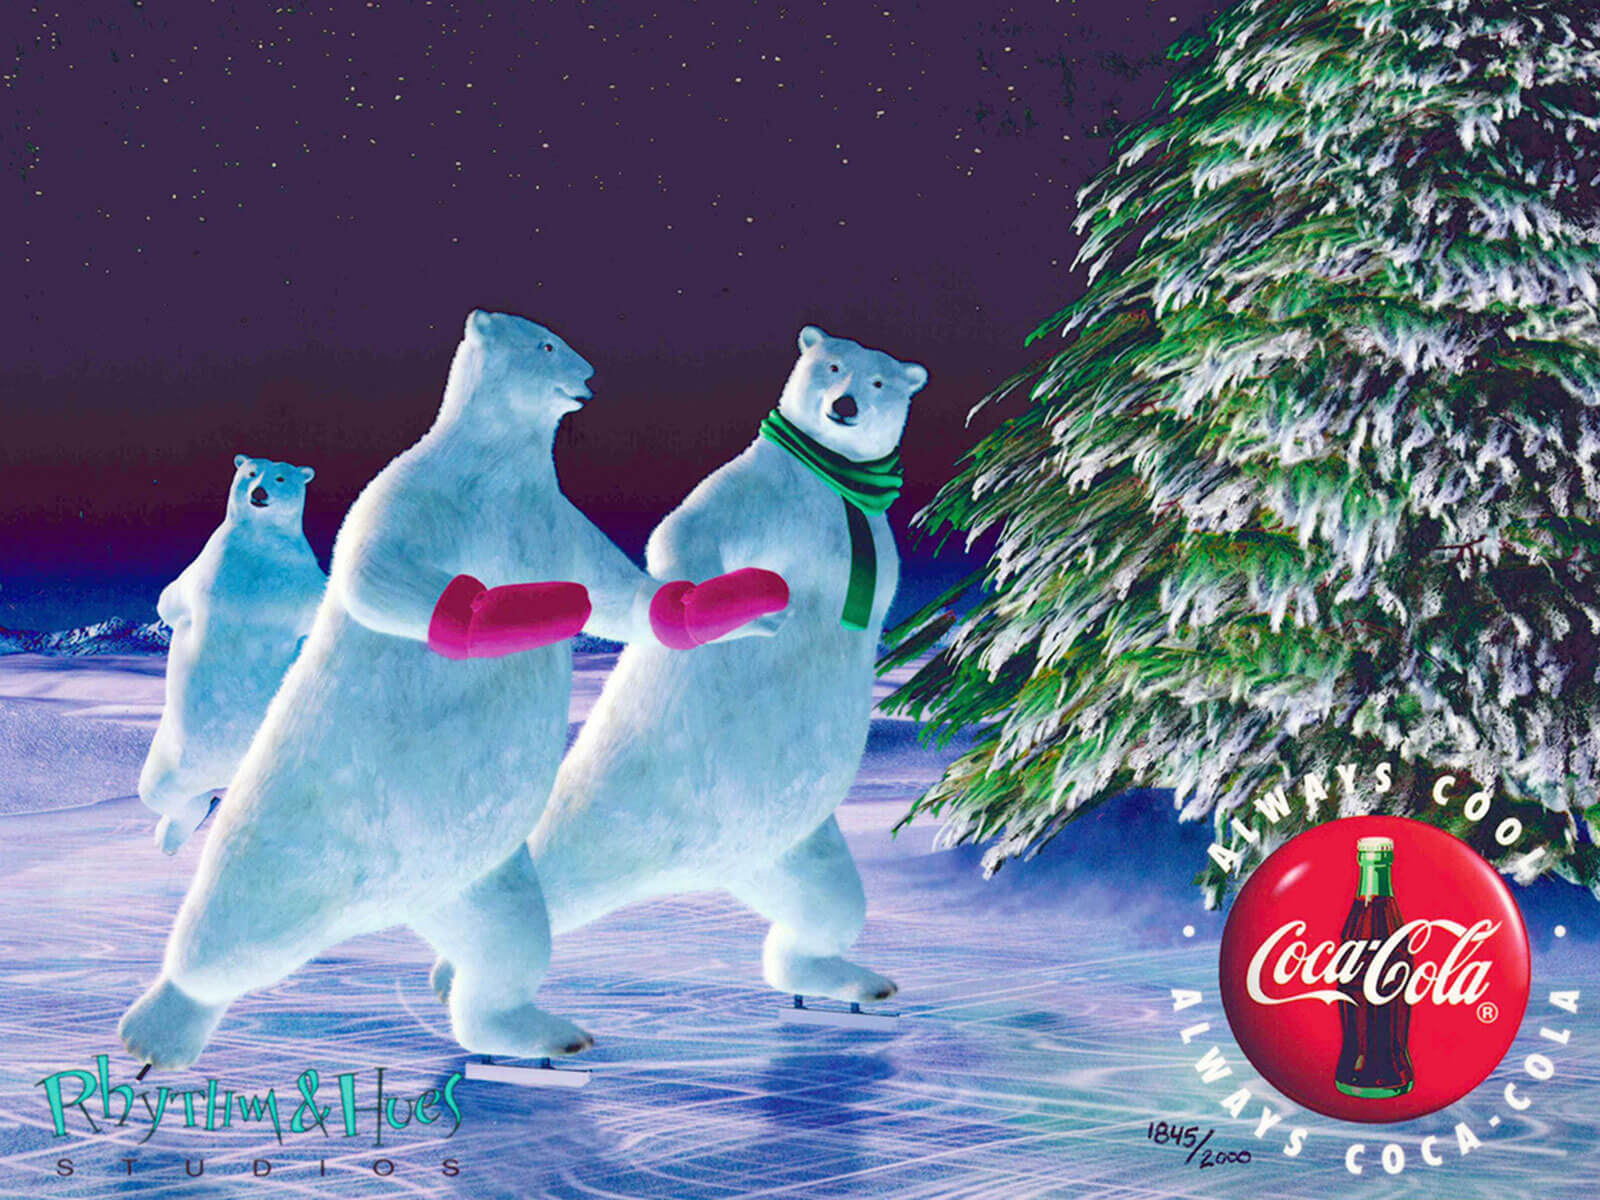 Two polar bears in a scarf and mittens ice skate past a snowy tree.